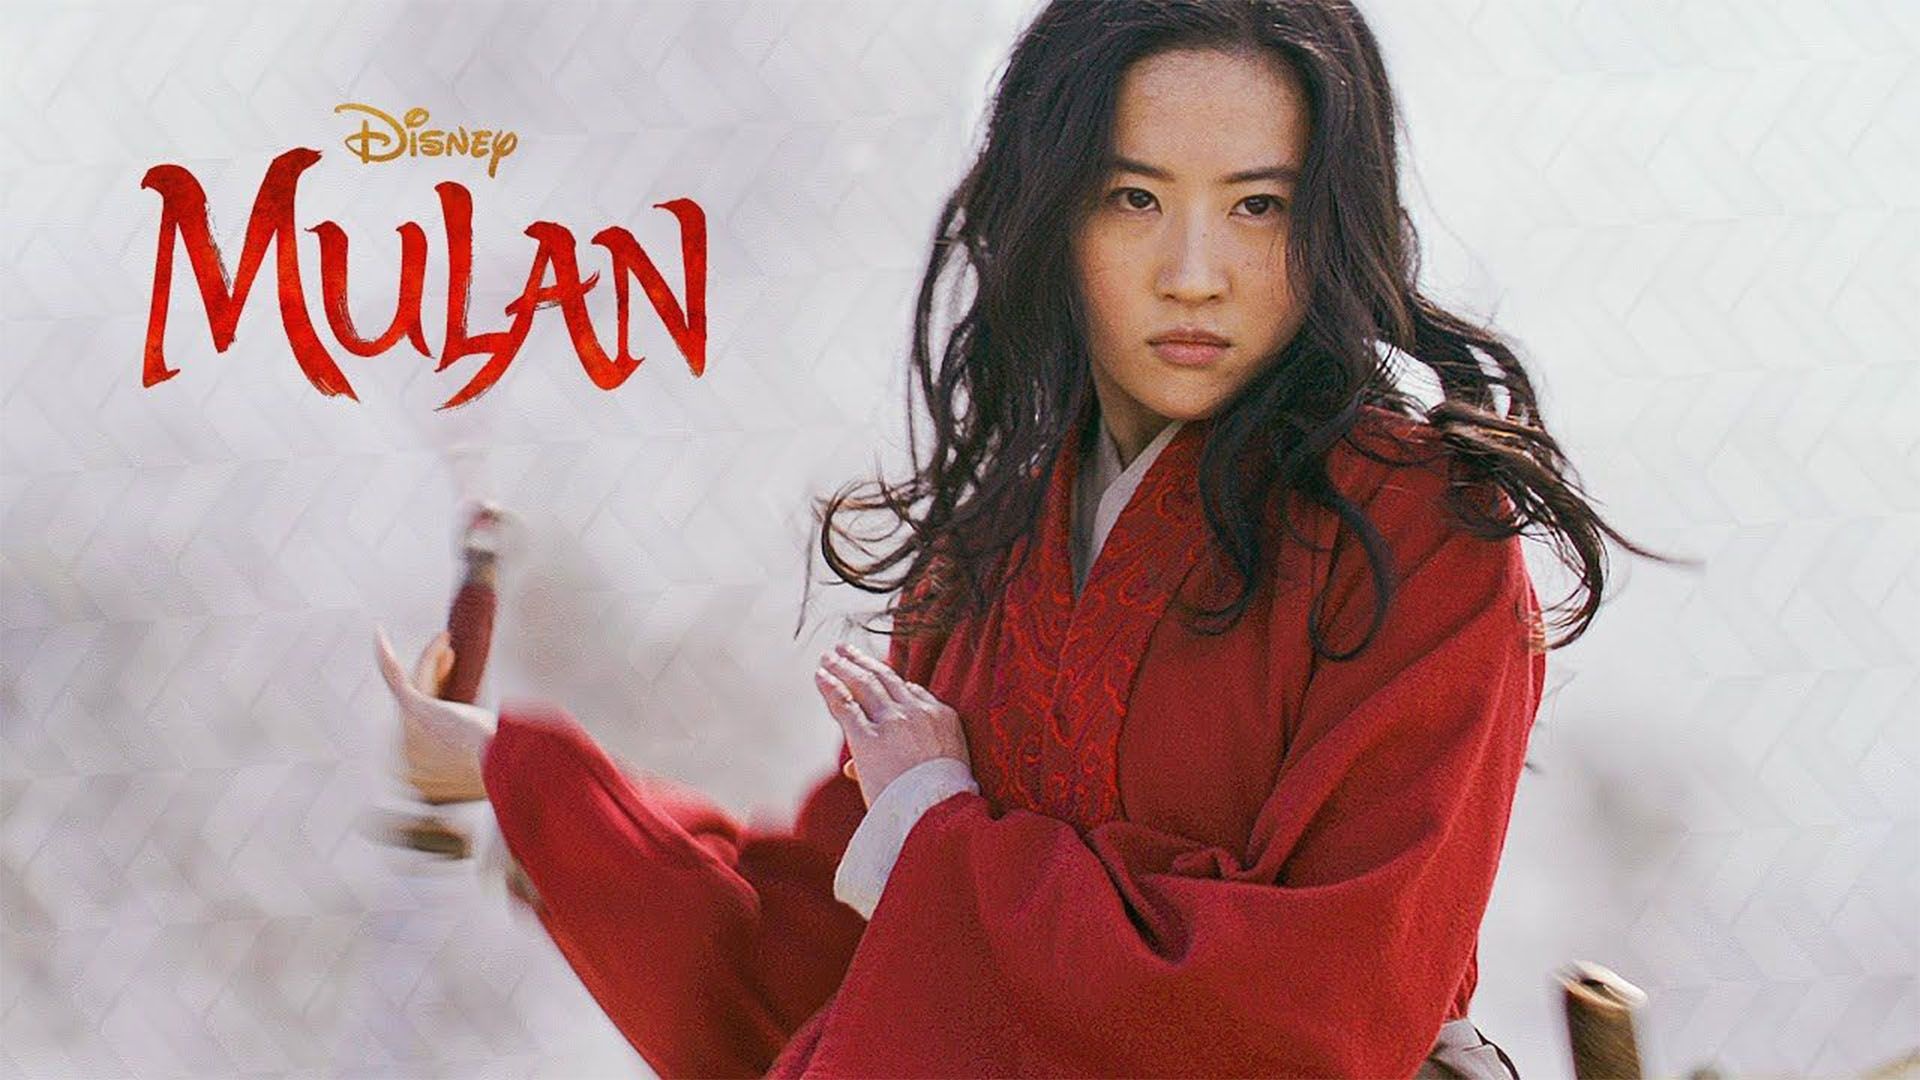 Mulan (Movie): Liu Yifei, named one of the New Four Dan actresses of China in 2009. 1920x1080 Full HD Background.